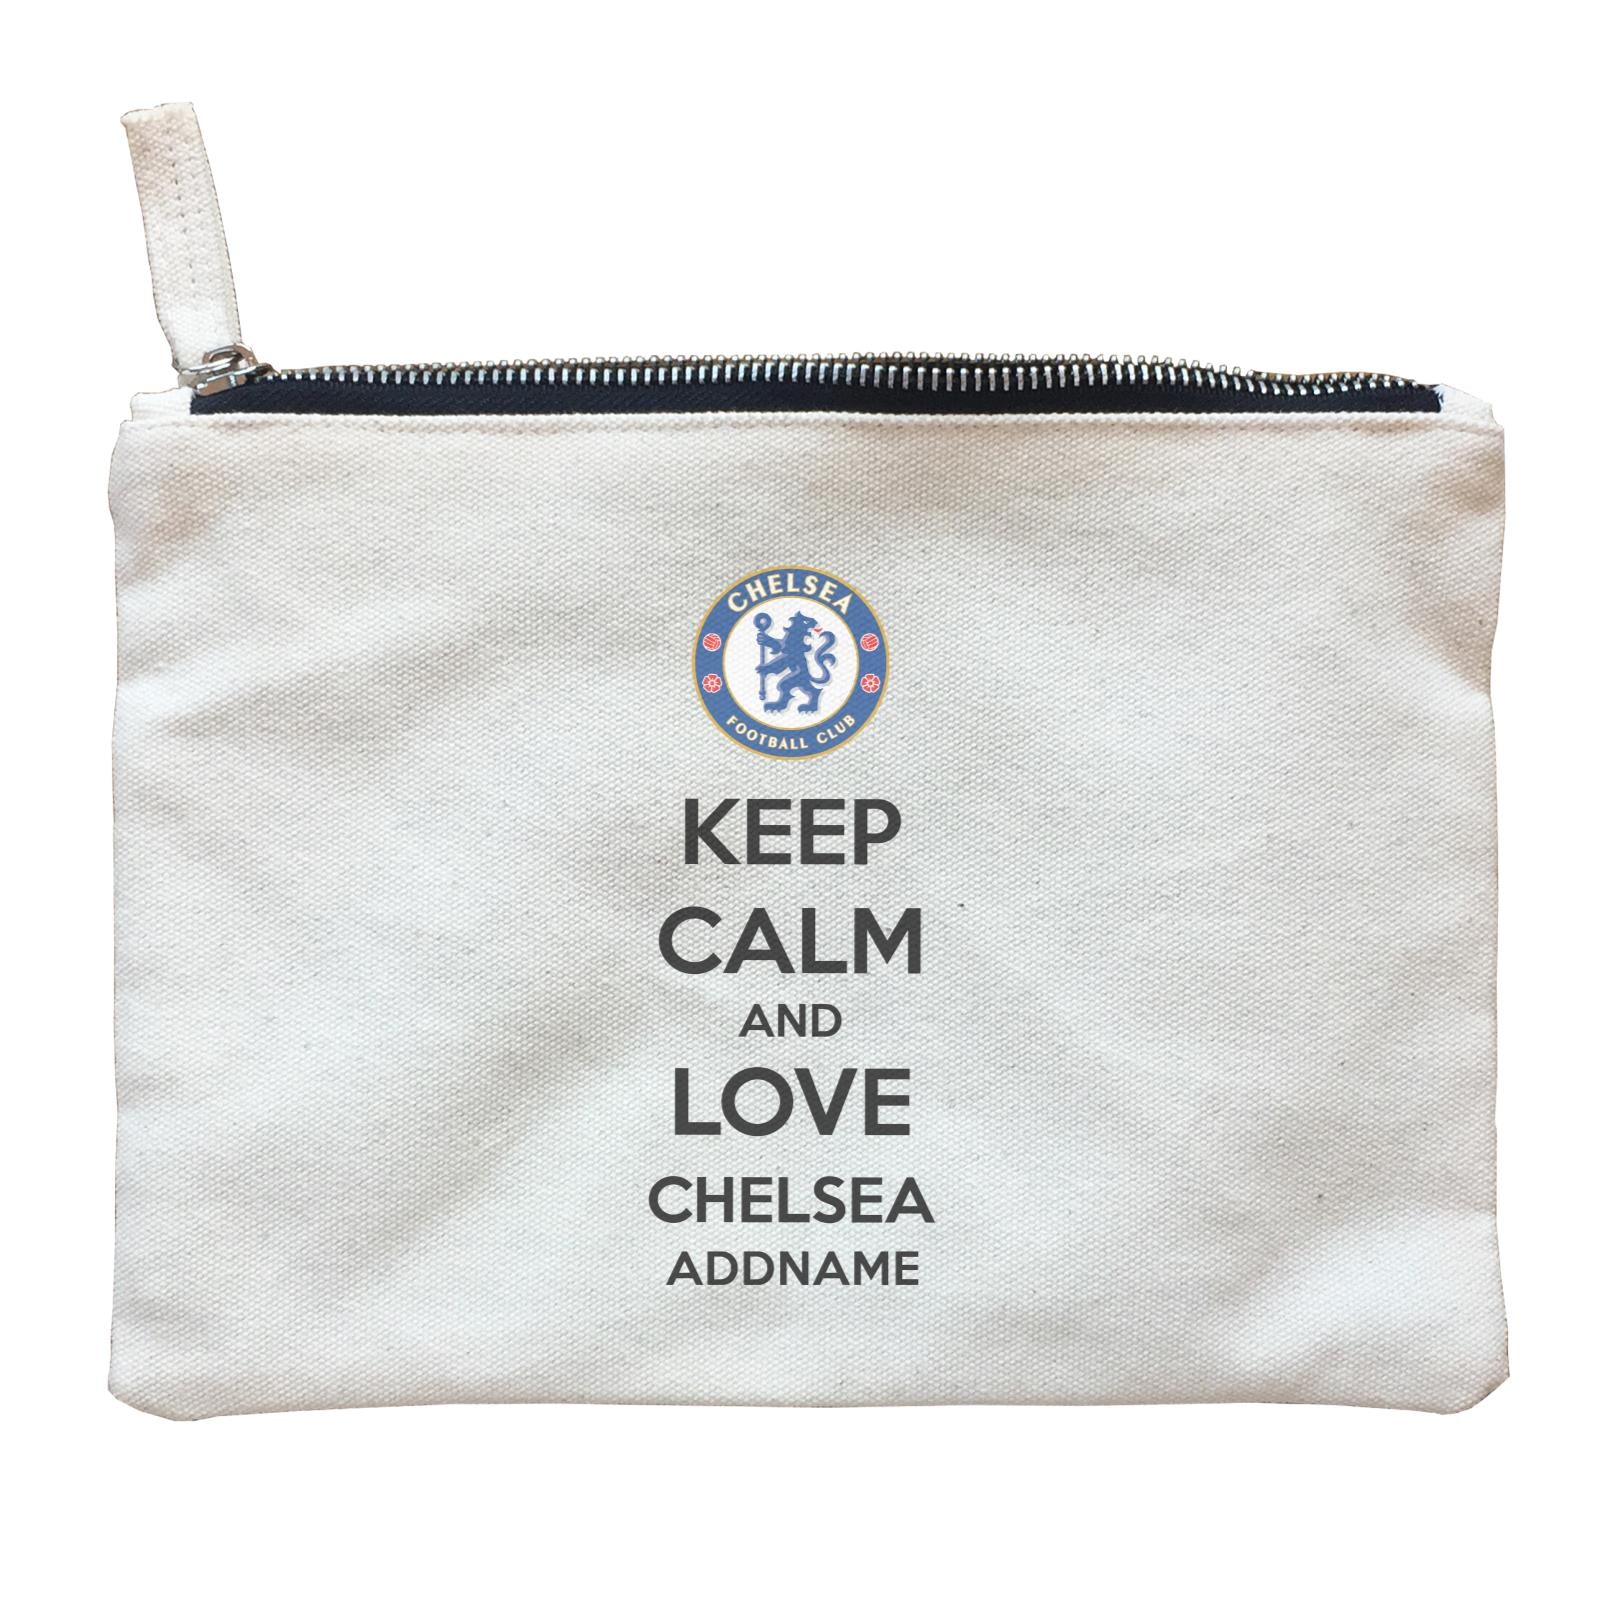 Chelsea Football Keep Calm And Love Series Addname Zipper Pouch